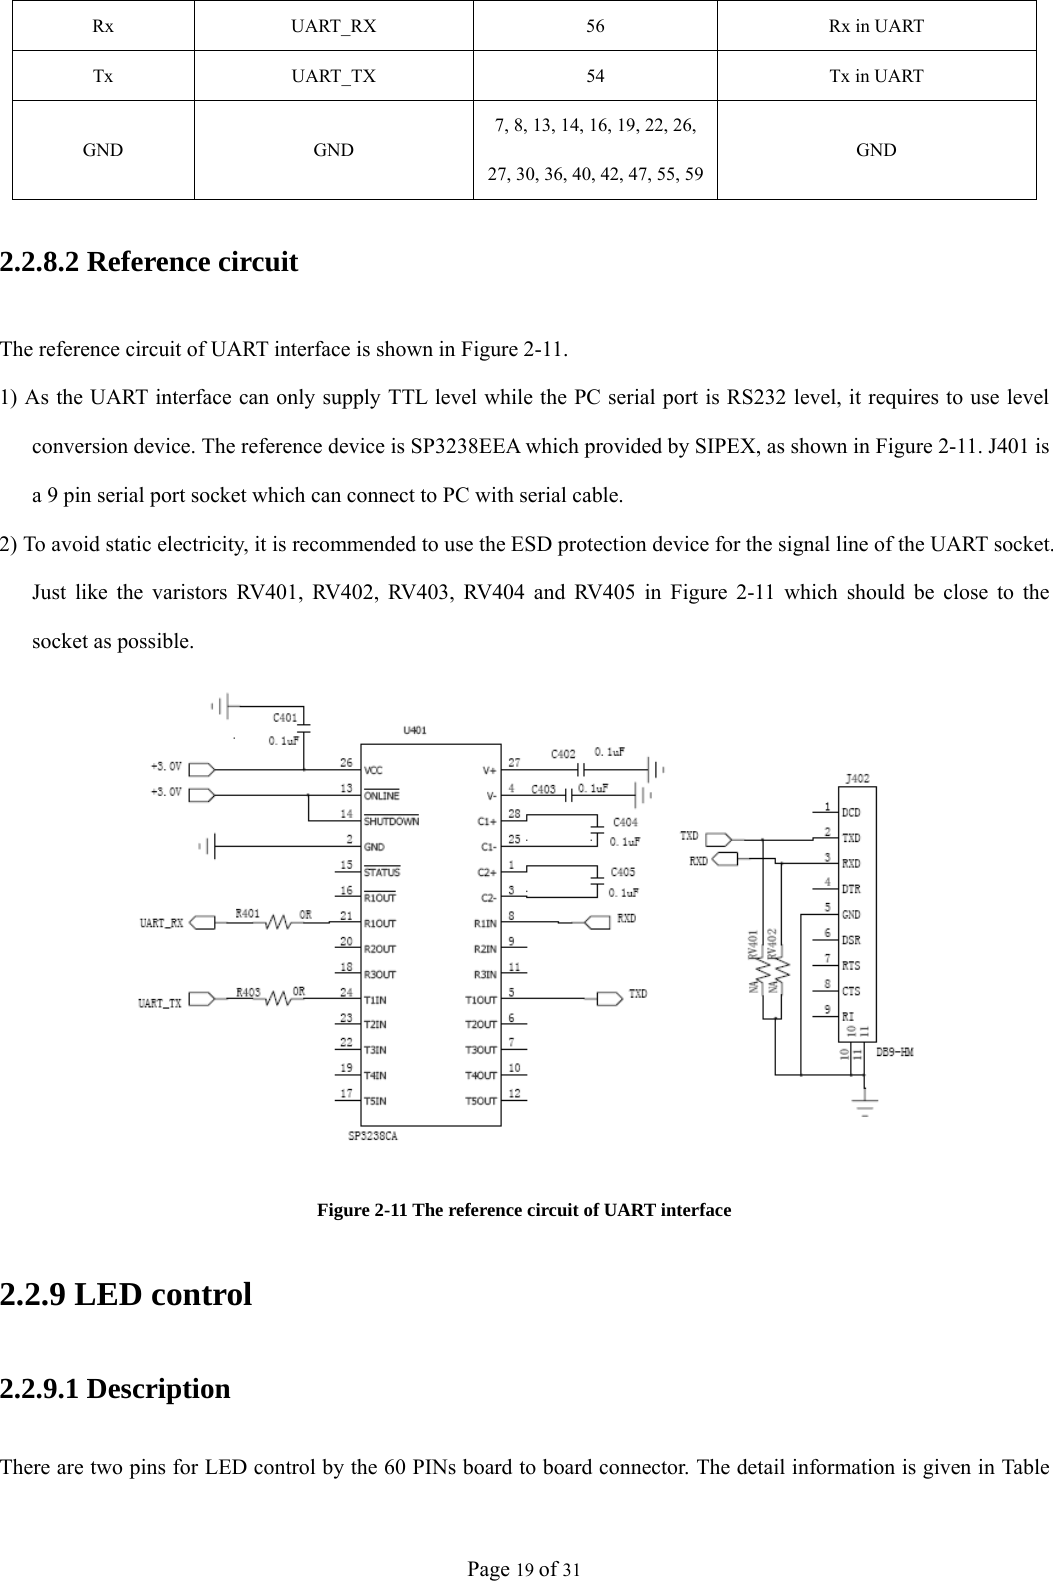 Page 19 of 31 2.2.8.2 Reference circuit The reference circuit of UART interface is shown in Figure 2-11. 1) As the UART interface can only supply TTL level while the PC serial port is RS232 level, it requires to use level conversion device. The reference device is SP3238EEA which provided by SIPEX, as shown in Figure 2-11. J401 is a 9 pin serial port socket which can connect to PC with serial cable. 2) To avoid static electricity, it is recommended to use the ESD protection device for the signal line of the UART socket. Just like the varistors RV401, RV402, RV403, RV404 and RV405 in Figure 2-11 which should be close to the socket as possible.  Figure 2-11 The reference circuit of UART interface 2.2.9 LED control 2.2.9.1 Description There are two pins for LED control by the 60 PINs board to board connector. The detail information is given in Table Rx  UART_RX  56  Rx in UART Tx  UART_TX  54  Tx in UART GND GND 7, 8, 13, 14, 16, 19, 22, 26, 27, 30, 36, 40, 42, 47, 55, 59GND 